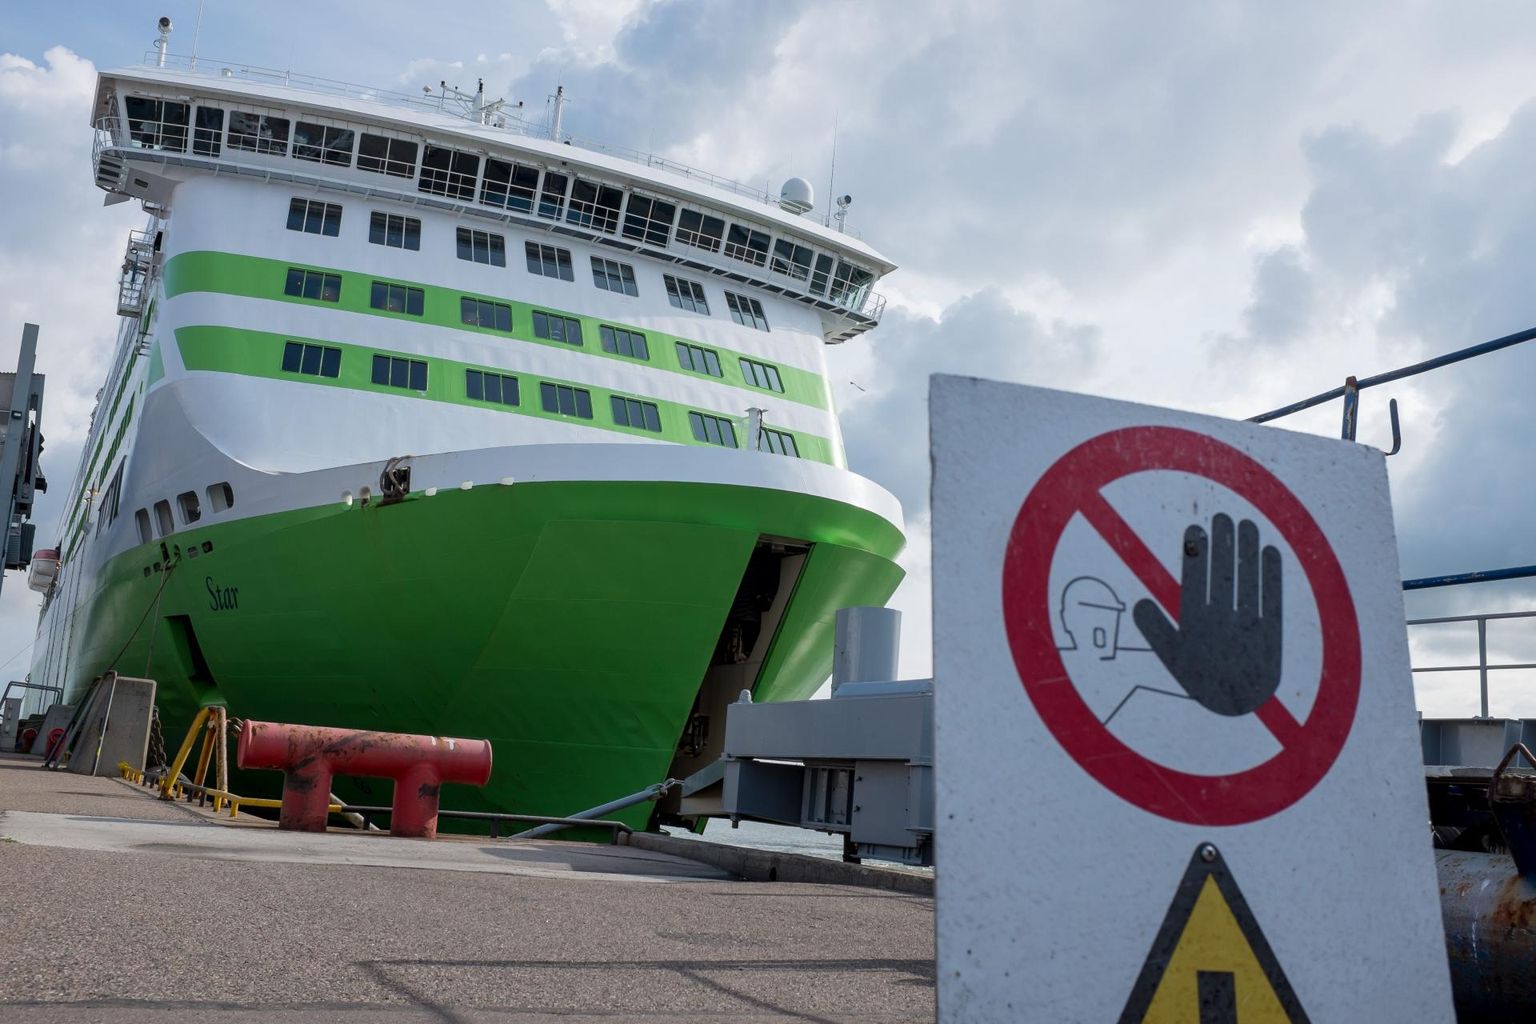 Baltic Sea shipping giant Tallink has launched major reorganization, with layoffs, unpaid leave and other cost-cutting measures to hit up to 2500 employees.